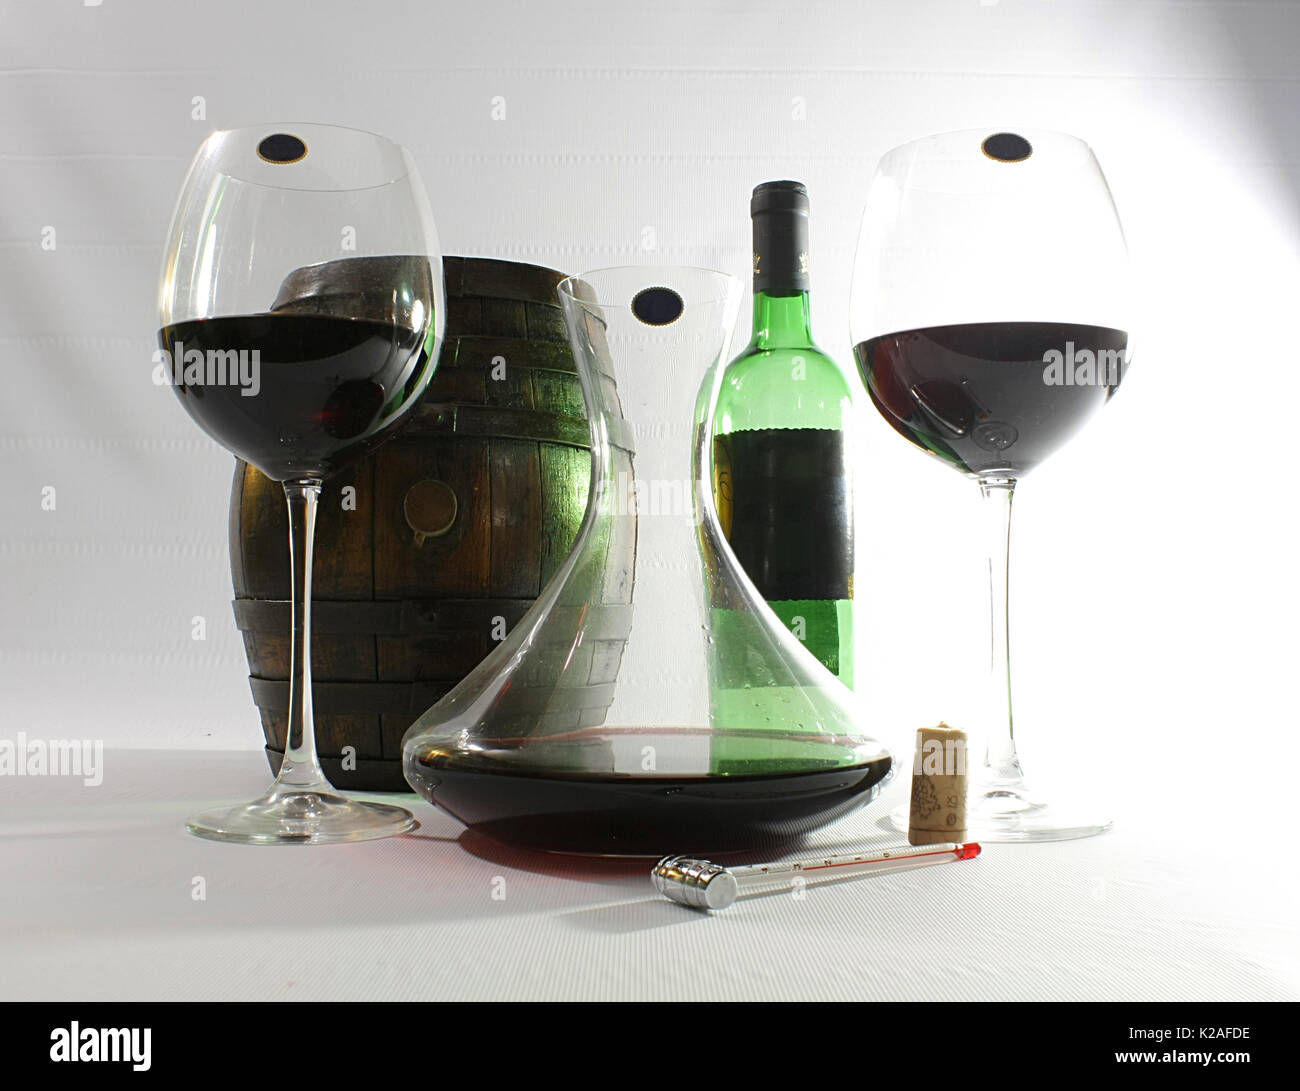 Glasses, decanter, bottle and thermometer Stock Photo